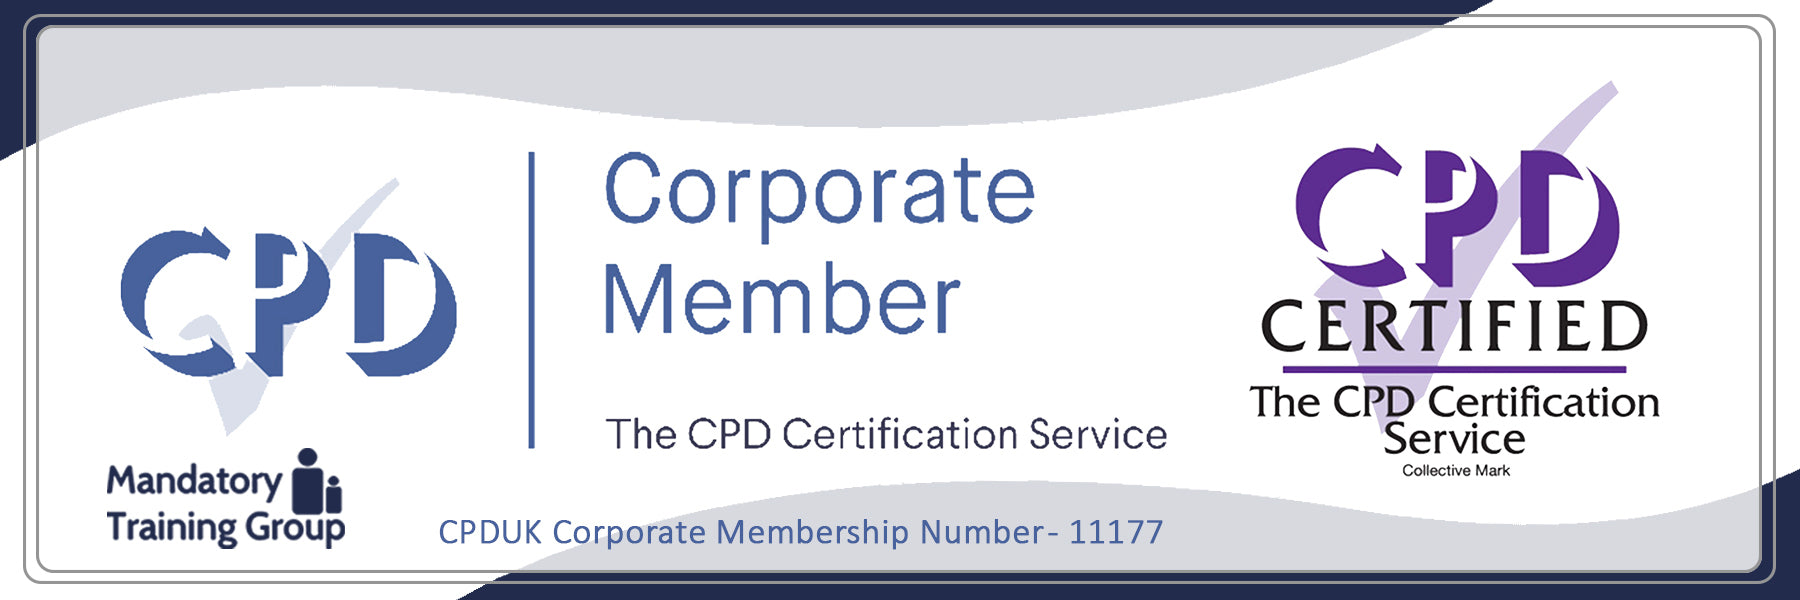 Recruitment - Online CPD Course - The Mandatory Training Group UK -